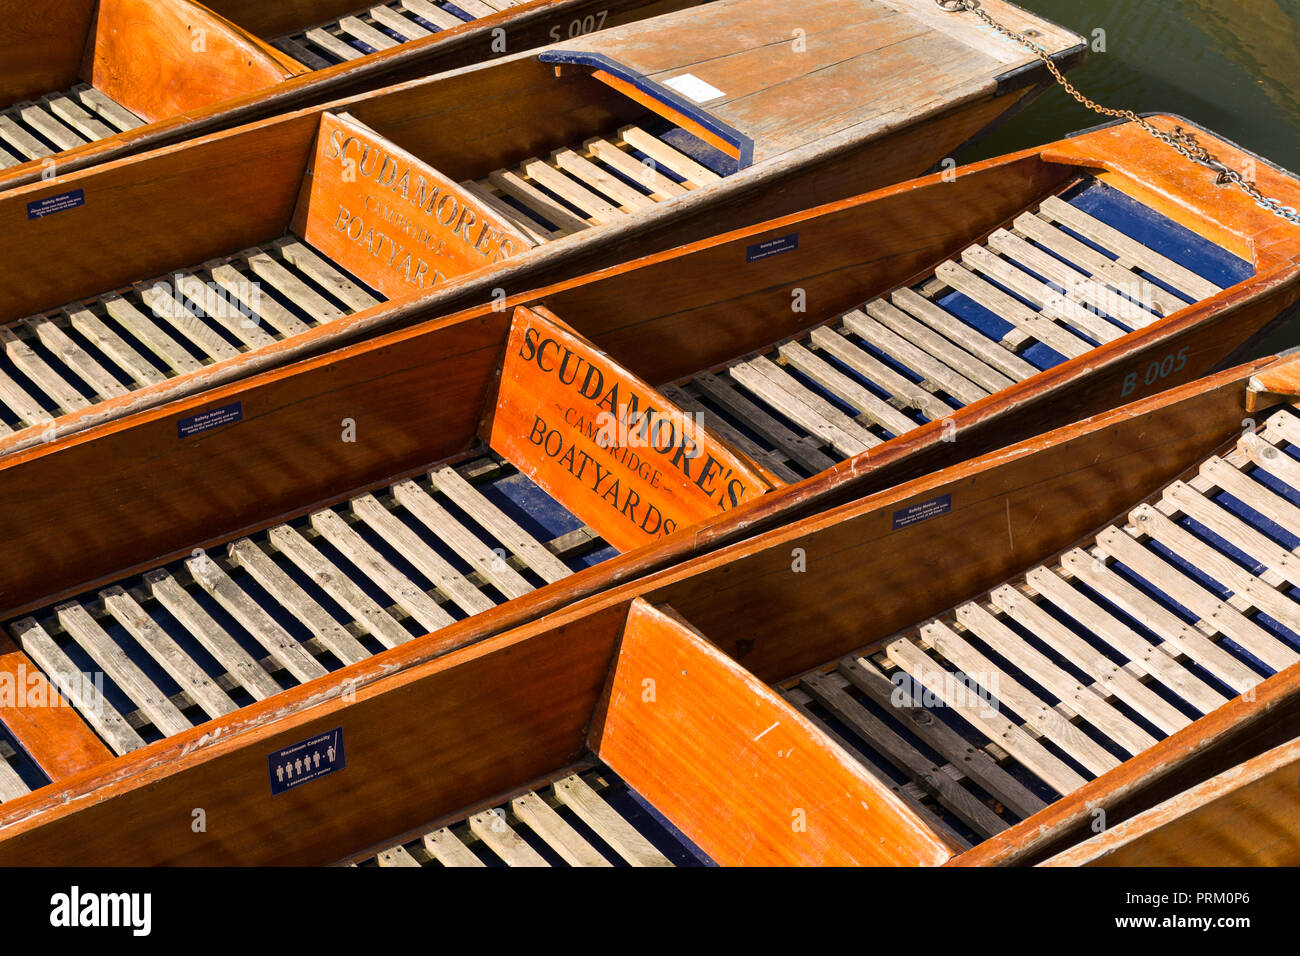 A row of punt boats with Scudamore's boatyards engraved on them on a sunny Summer day, Cambridge, UK Stock Photo